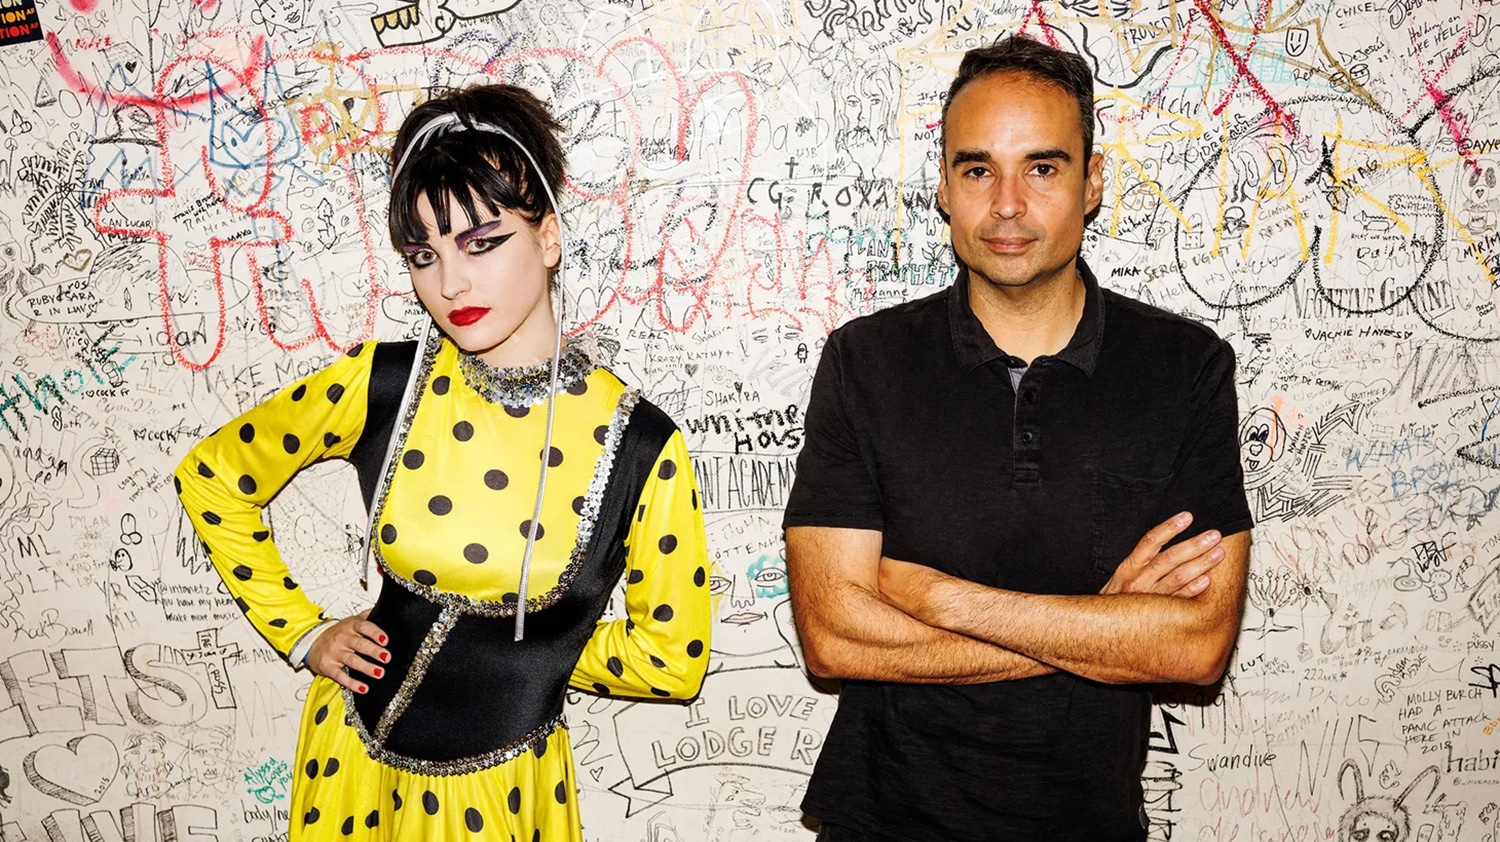 March Adstrum, wearing a yellow polka dot outfit, (L) & John Tejada, wearing a black button-up shirt, (R) stand in front of heavily graffitied wall